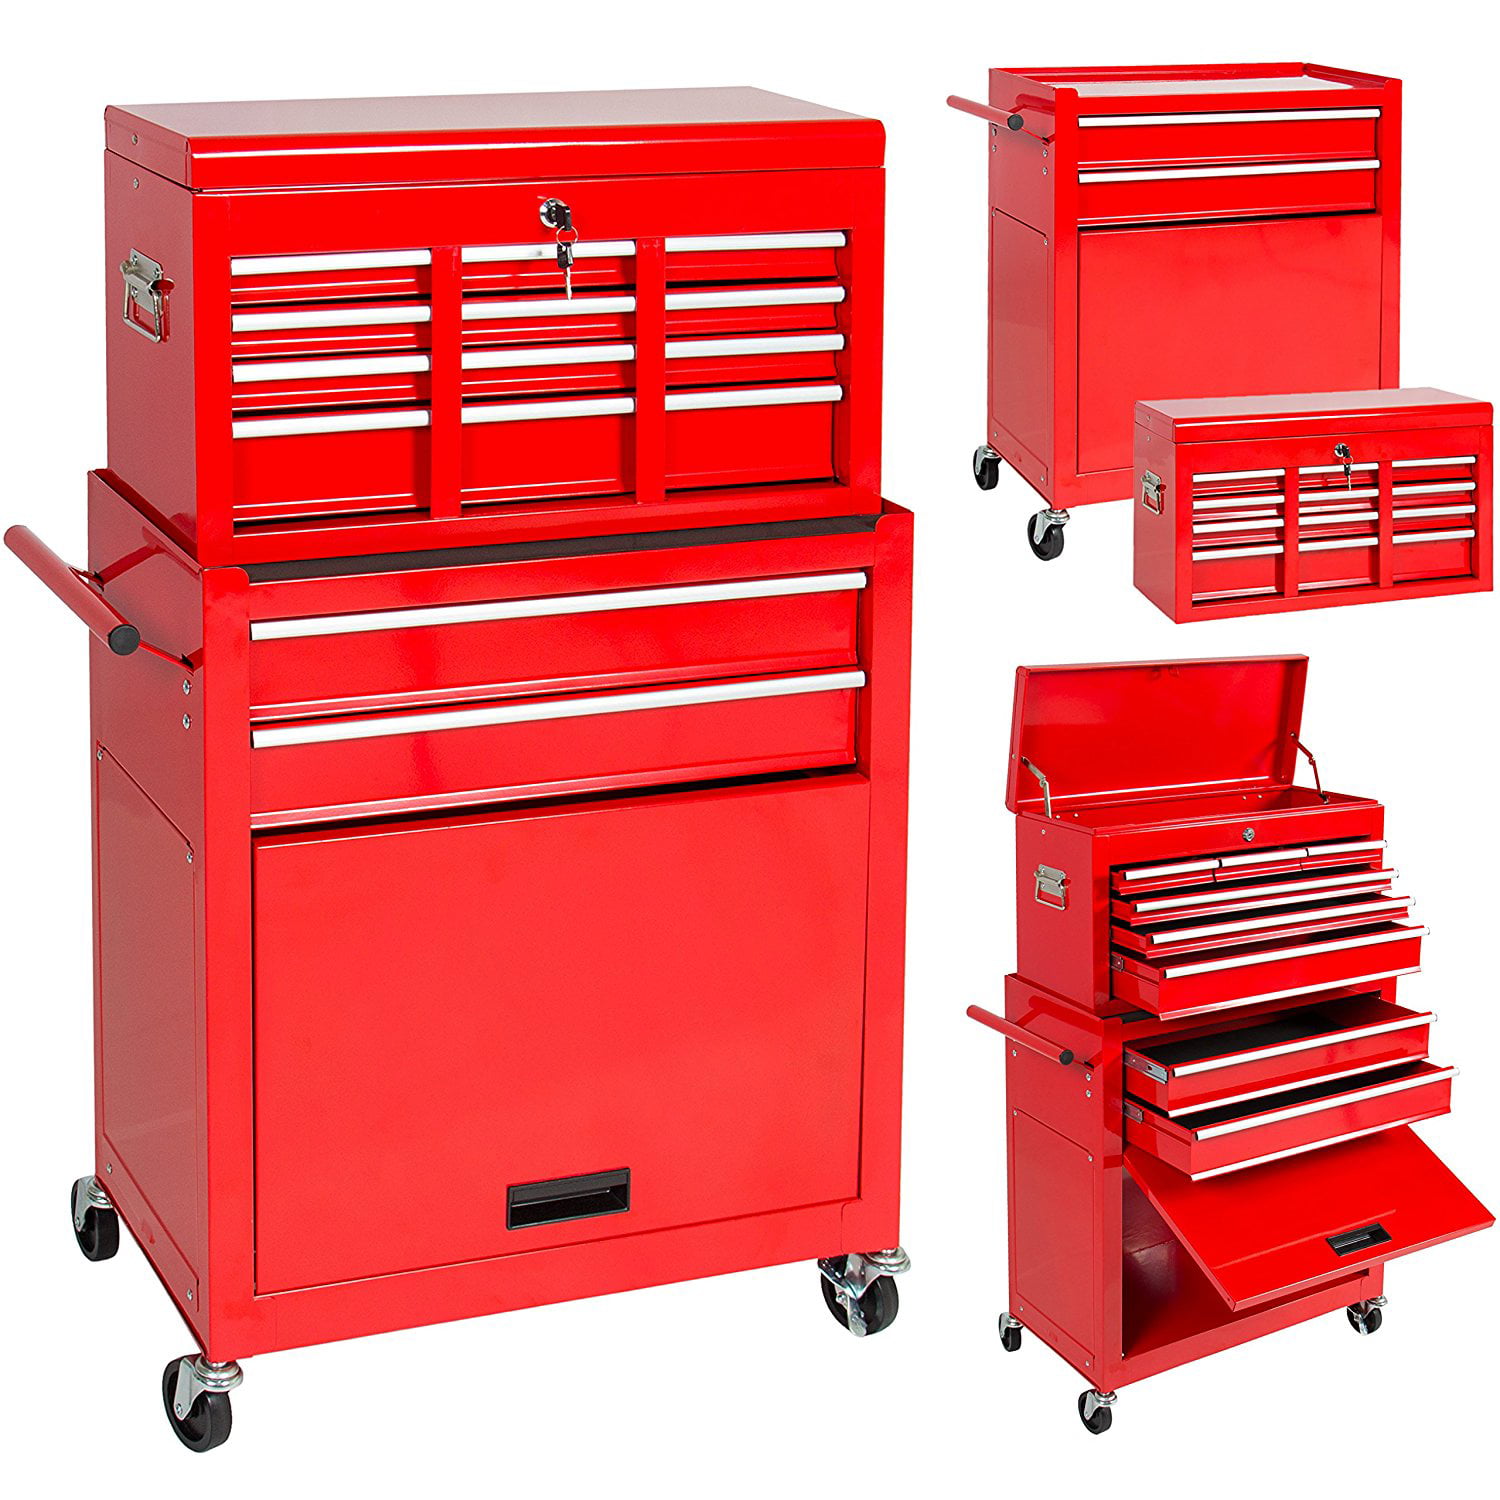 178 US PRO TOOLS RED STEEL METAL GARAGE STORAGE CUPBOARD CABINET TOOL CHEST BOX 